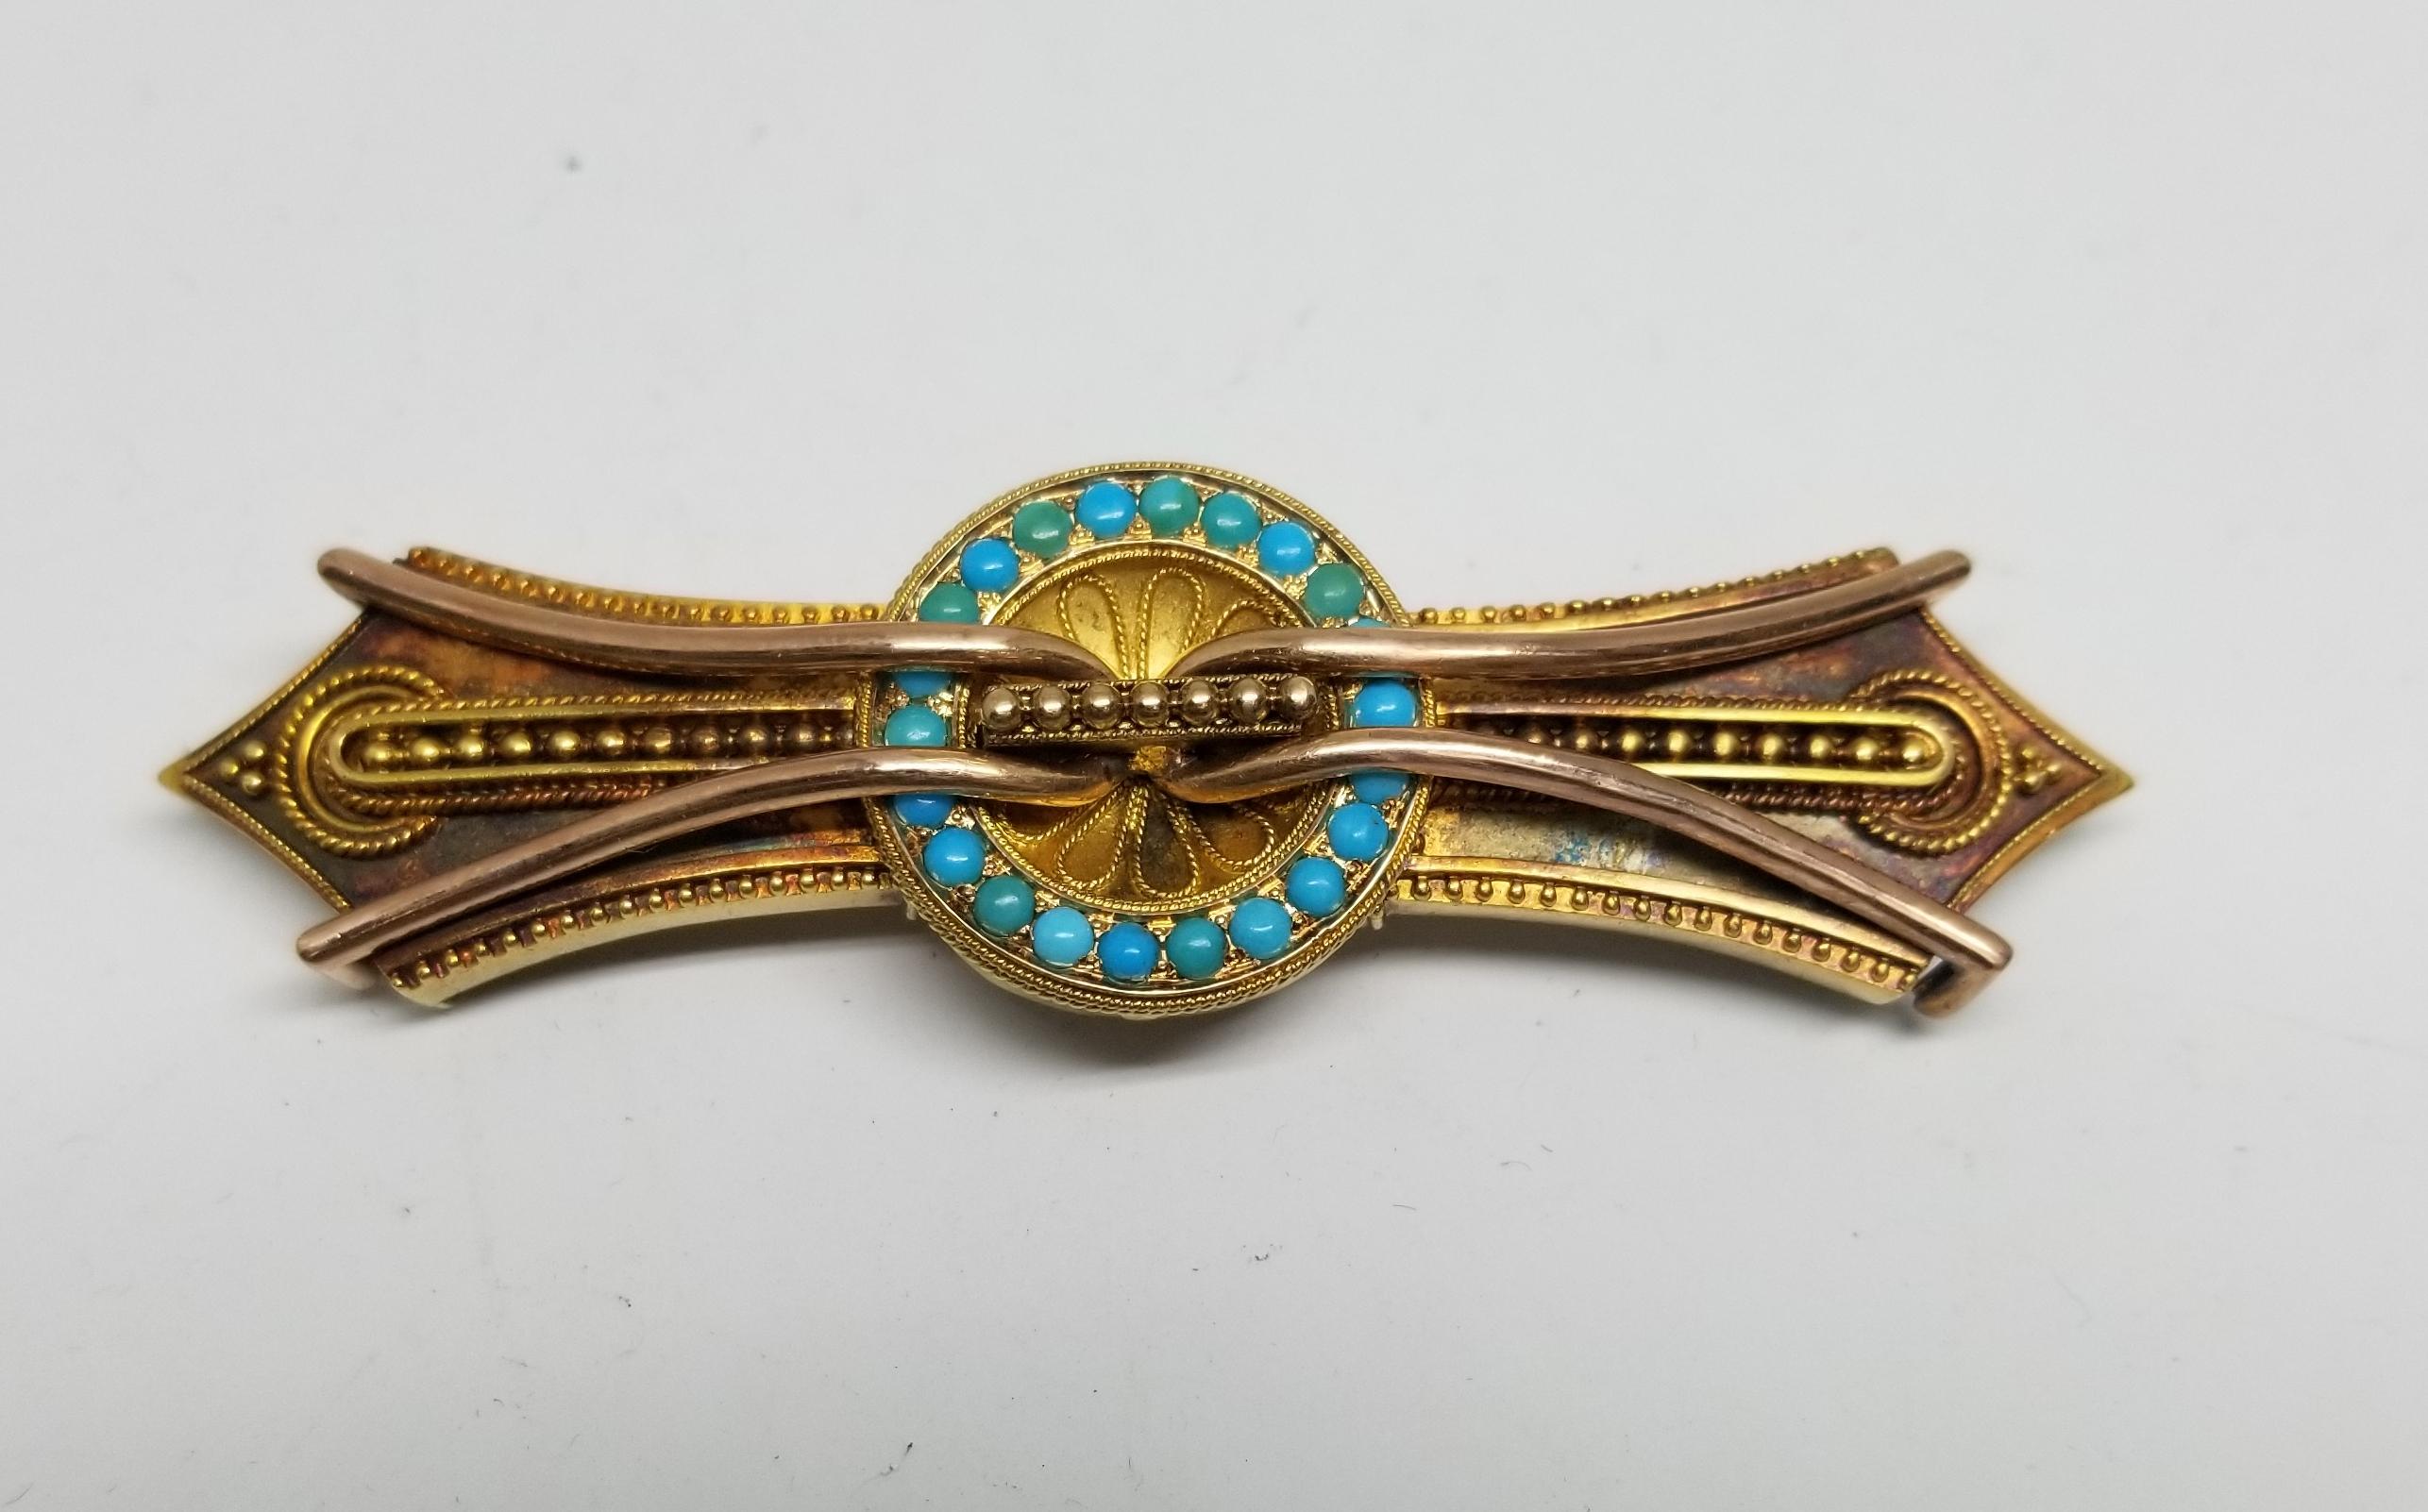 10 karat yellow and rose Turquoise vintage byzantine style brooch, with 22 round turquoise, the brooch has a loop in the back that could be worn as a pendant.